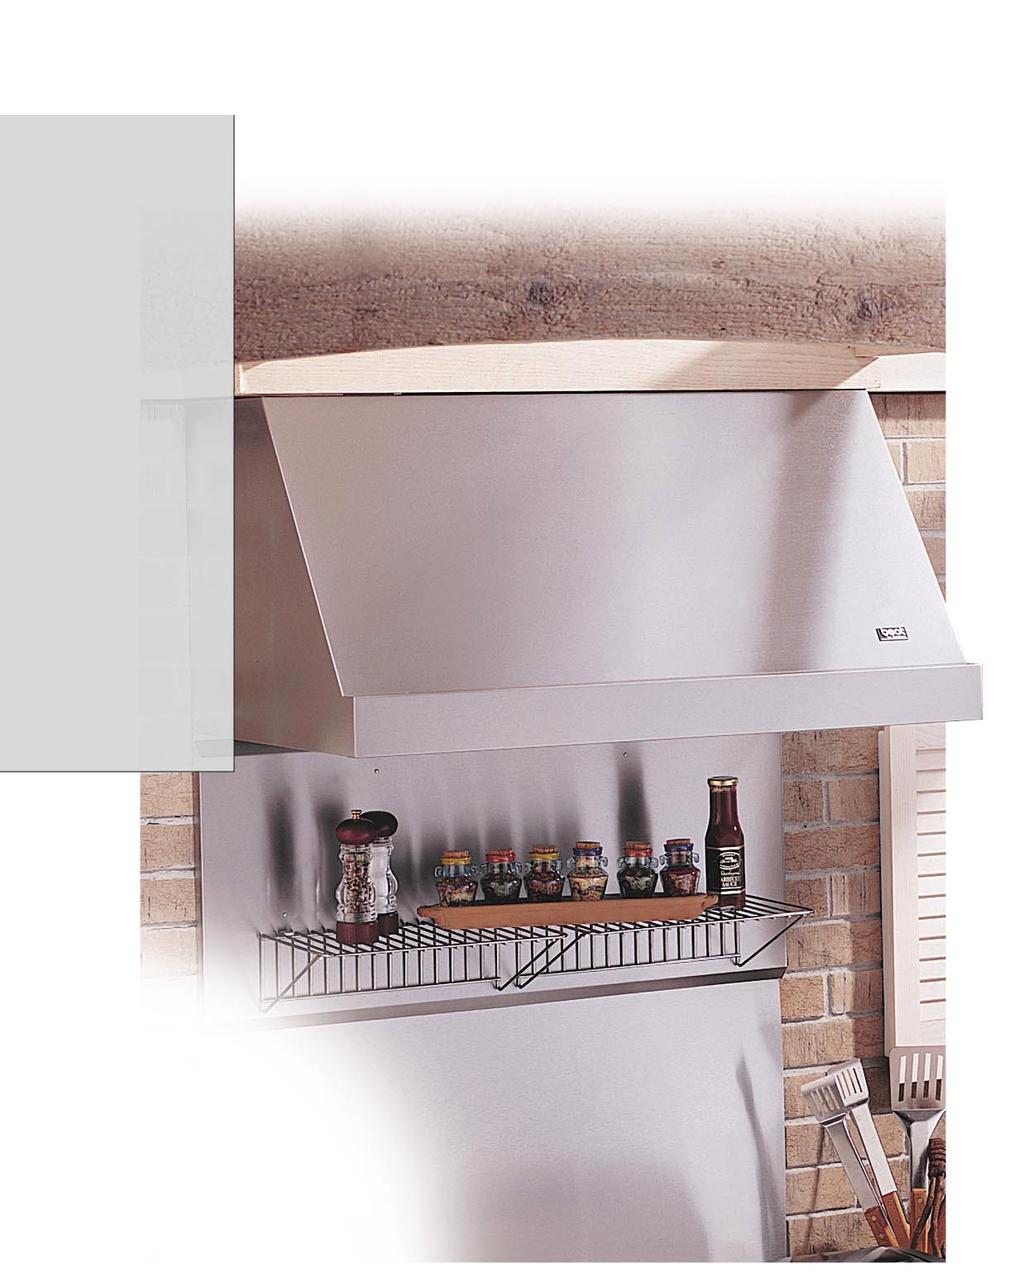 PROFESSIONAL STYLE K260D Professional-style hood for covered patio or lanai areas is finished in corrosionresistant stainless steel Large hood is designed to handle high heat levels Powerful yet